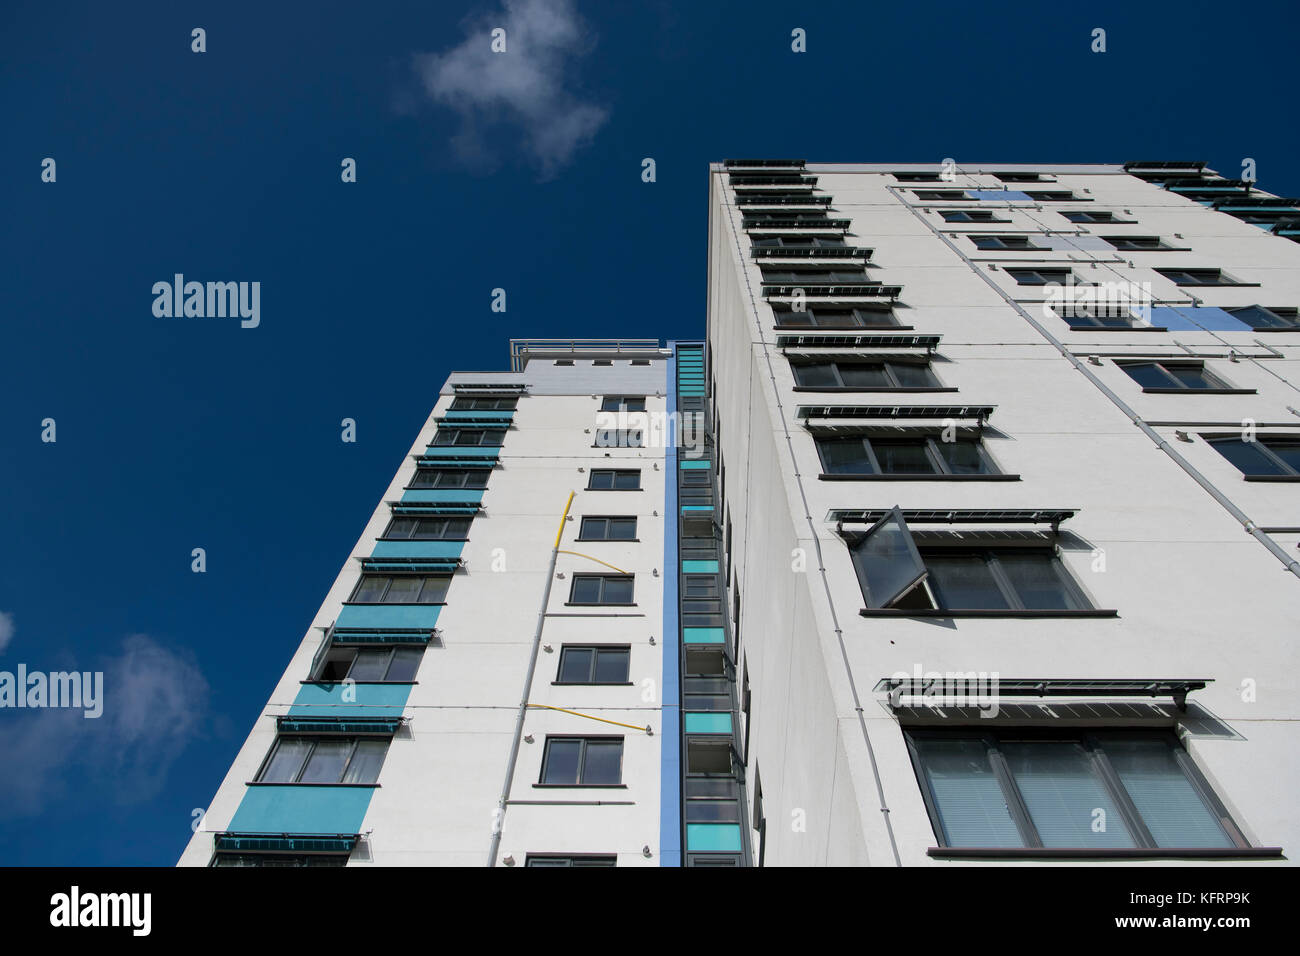 A high-rise council tower block building. Stock Photo